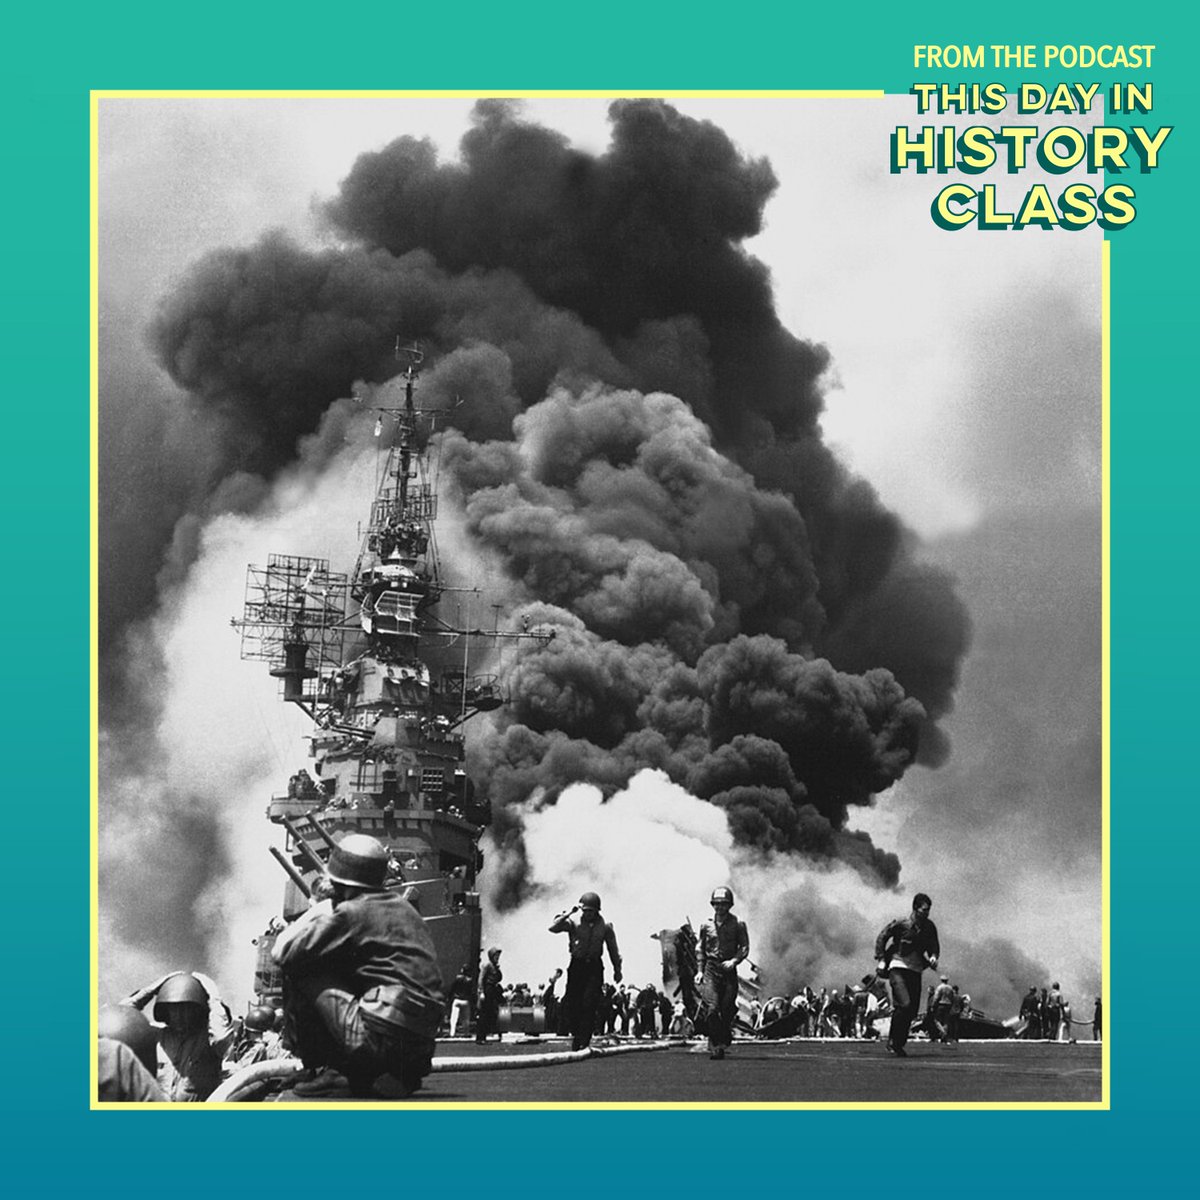 On this day in 1944, the first kamikaze bombers sank an American warship at the Battle of Leyte Gulf.

#Kamikaze #DivineWind #Japan #AlliedForces #WWII #Warship #Pilots #LeyteGulf  #TDIHC #ThisDayInHistory #TodayInHistory #OnThisDay #October25

Listen now:
omny.fm/shows/this-day…